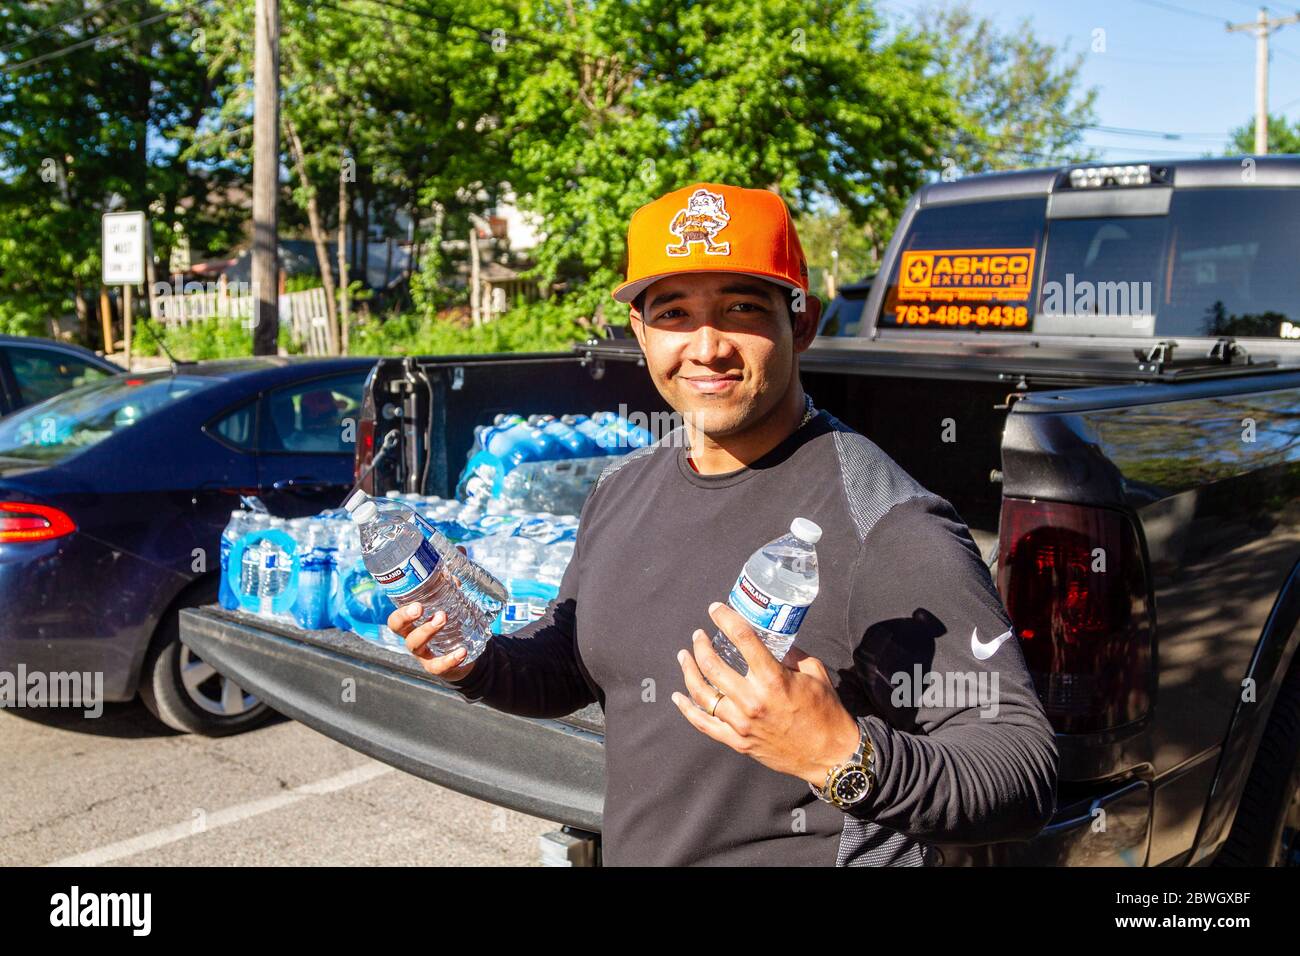 Minneapolis, United States. 30th May, 2020. Minneapolis, MN - May 30, 2020: Volunteer hands out water at the aftermath scene of the George Floyd Black Lives Matter protest and riots on May 30, 2020 in Minneapolis, Minnesota. Credit: Jake Handegard/The Photo Access Credit: The Photo Access/Alamy Live News Stock Photo